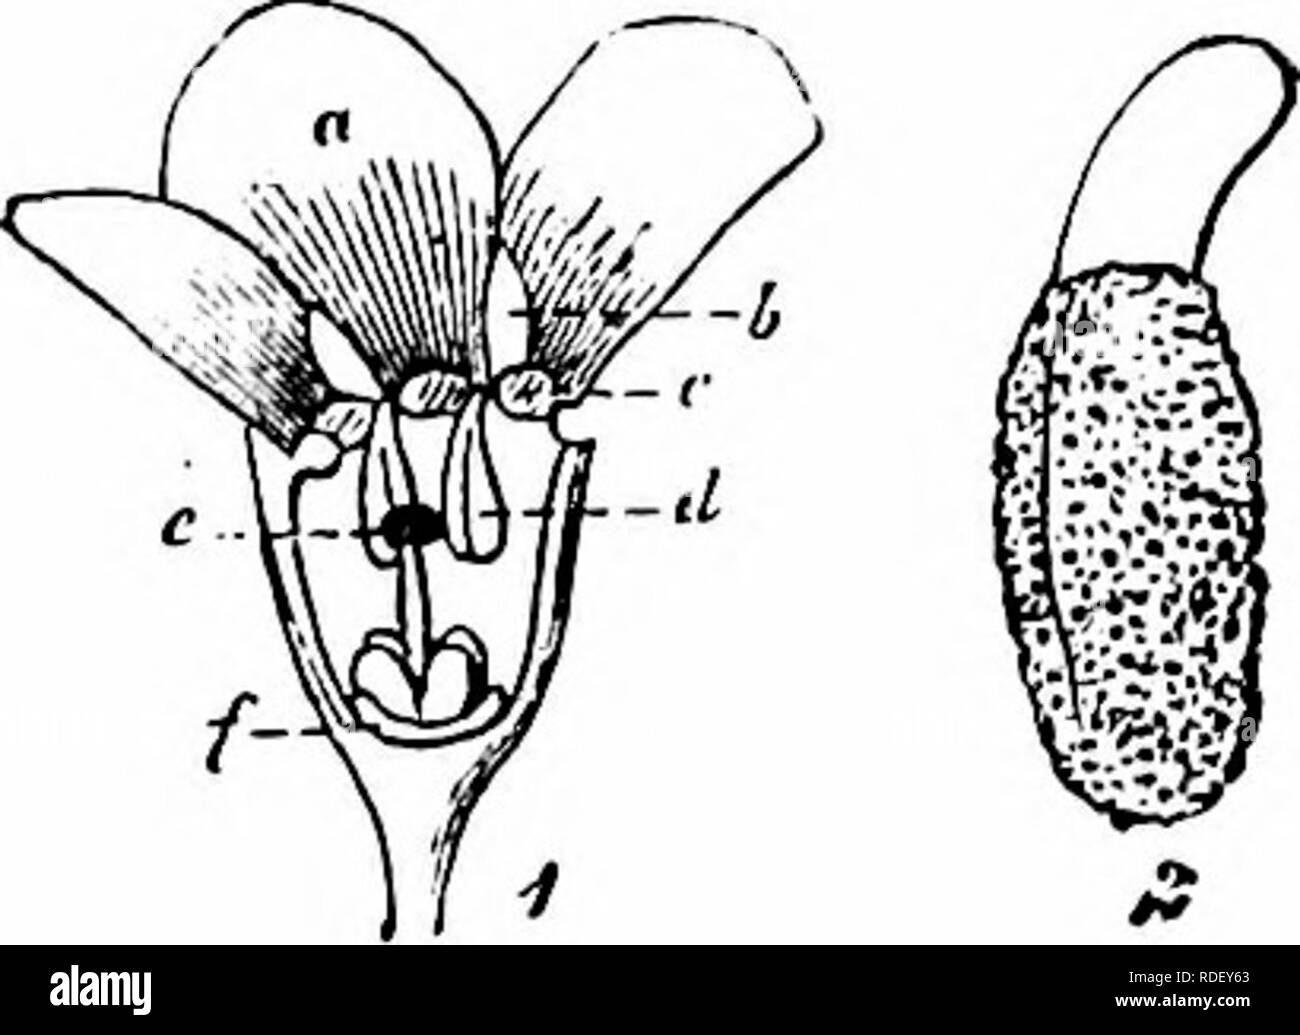 . Handbook of flower pollination : based upon Hermann MuÌller's work 'The fertilisation of flowers by insects' . Fertilization of plants. BORAGINEAE 141 2005. M. collina Hoffm. ( = M. hispida Schkchl.). (Herm. Muller, 'Fertilisa- tion,' p. 416, ' Weit. Beob.,' II, pp. 18-19.)âThe mechanism of the minute homogamous, bright blue flowers of this species agrees essentially with that of M. intermedia. The anthers are contained in the short (scarcely 2 mm.) corolla-tube, and converge together over the stigma, upon which they ultimately drop pollen. Should there be insect-visits, however, crossing ta Stock Photo